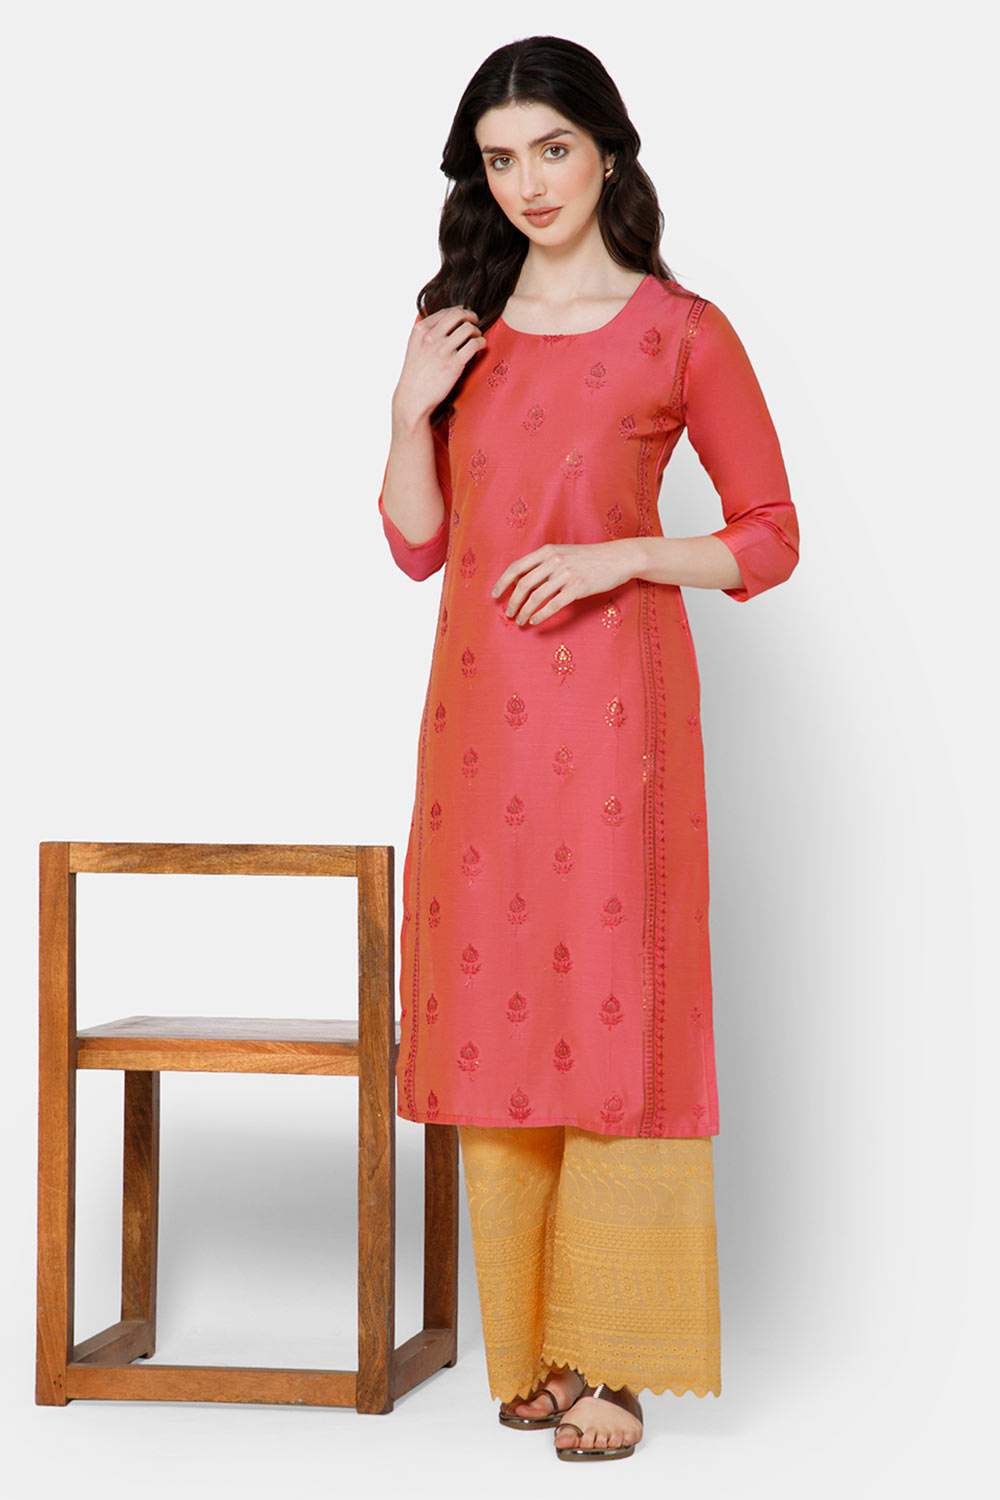 Mythri Women's Ethnic wear with Sequins Embroidery - Peach - E039